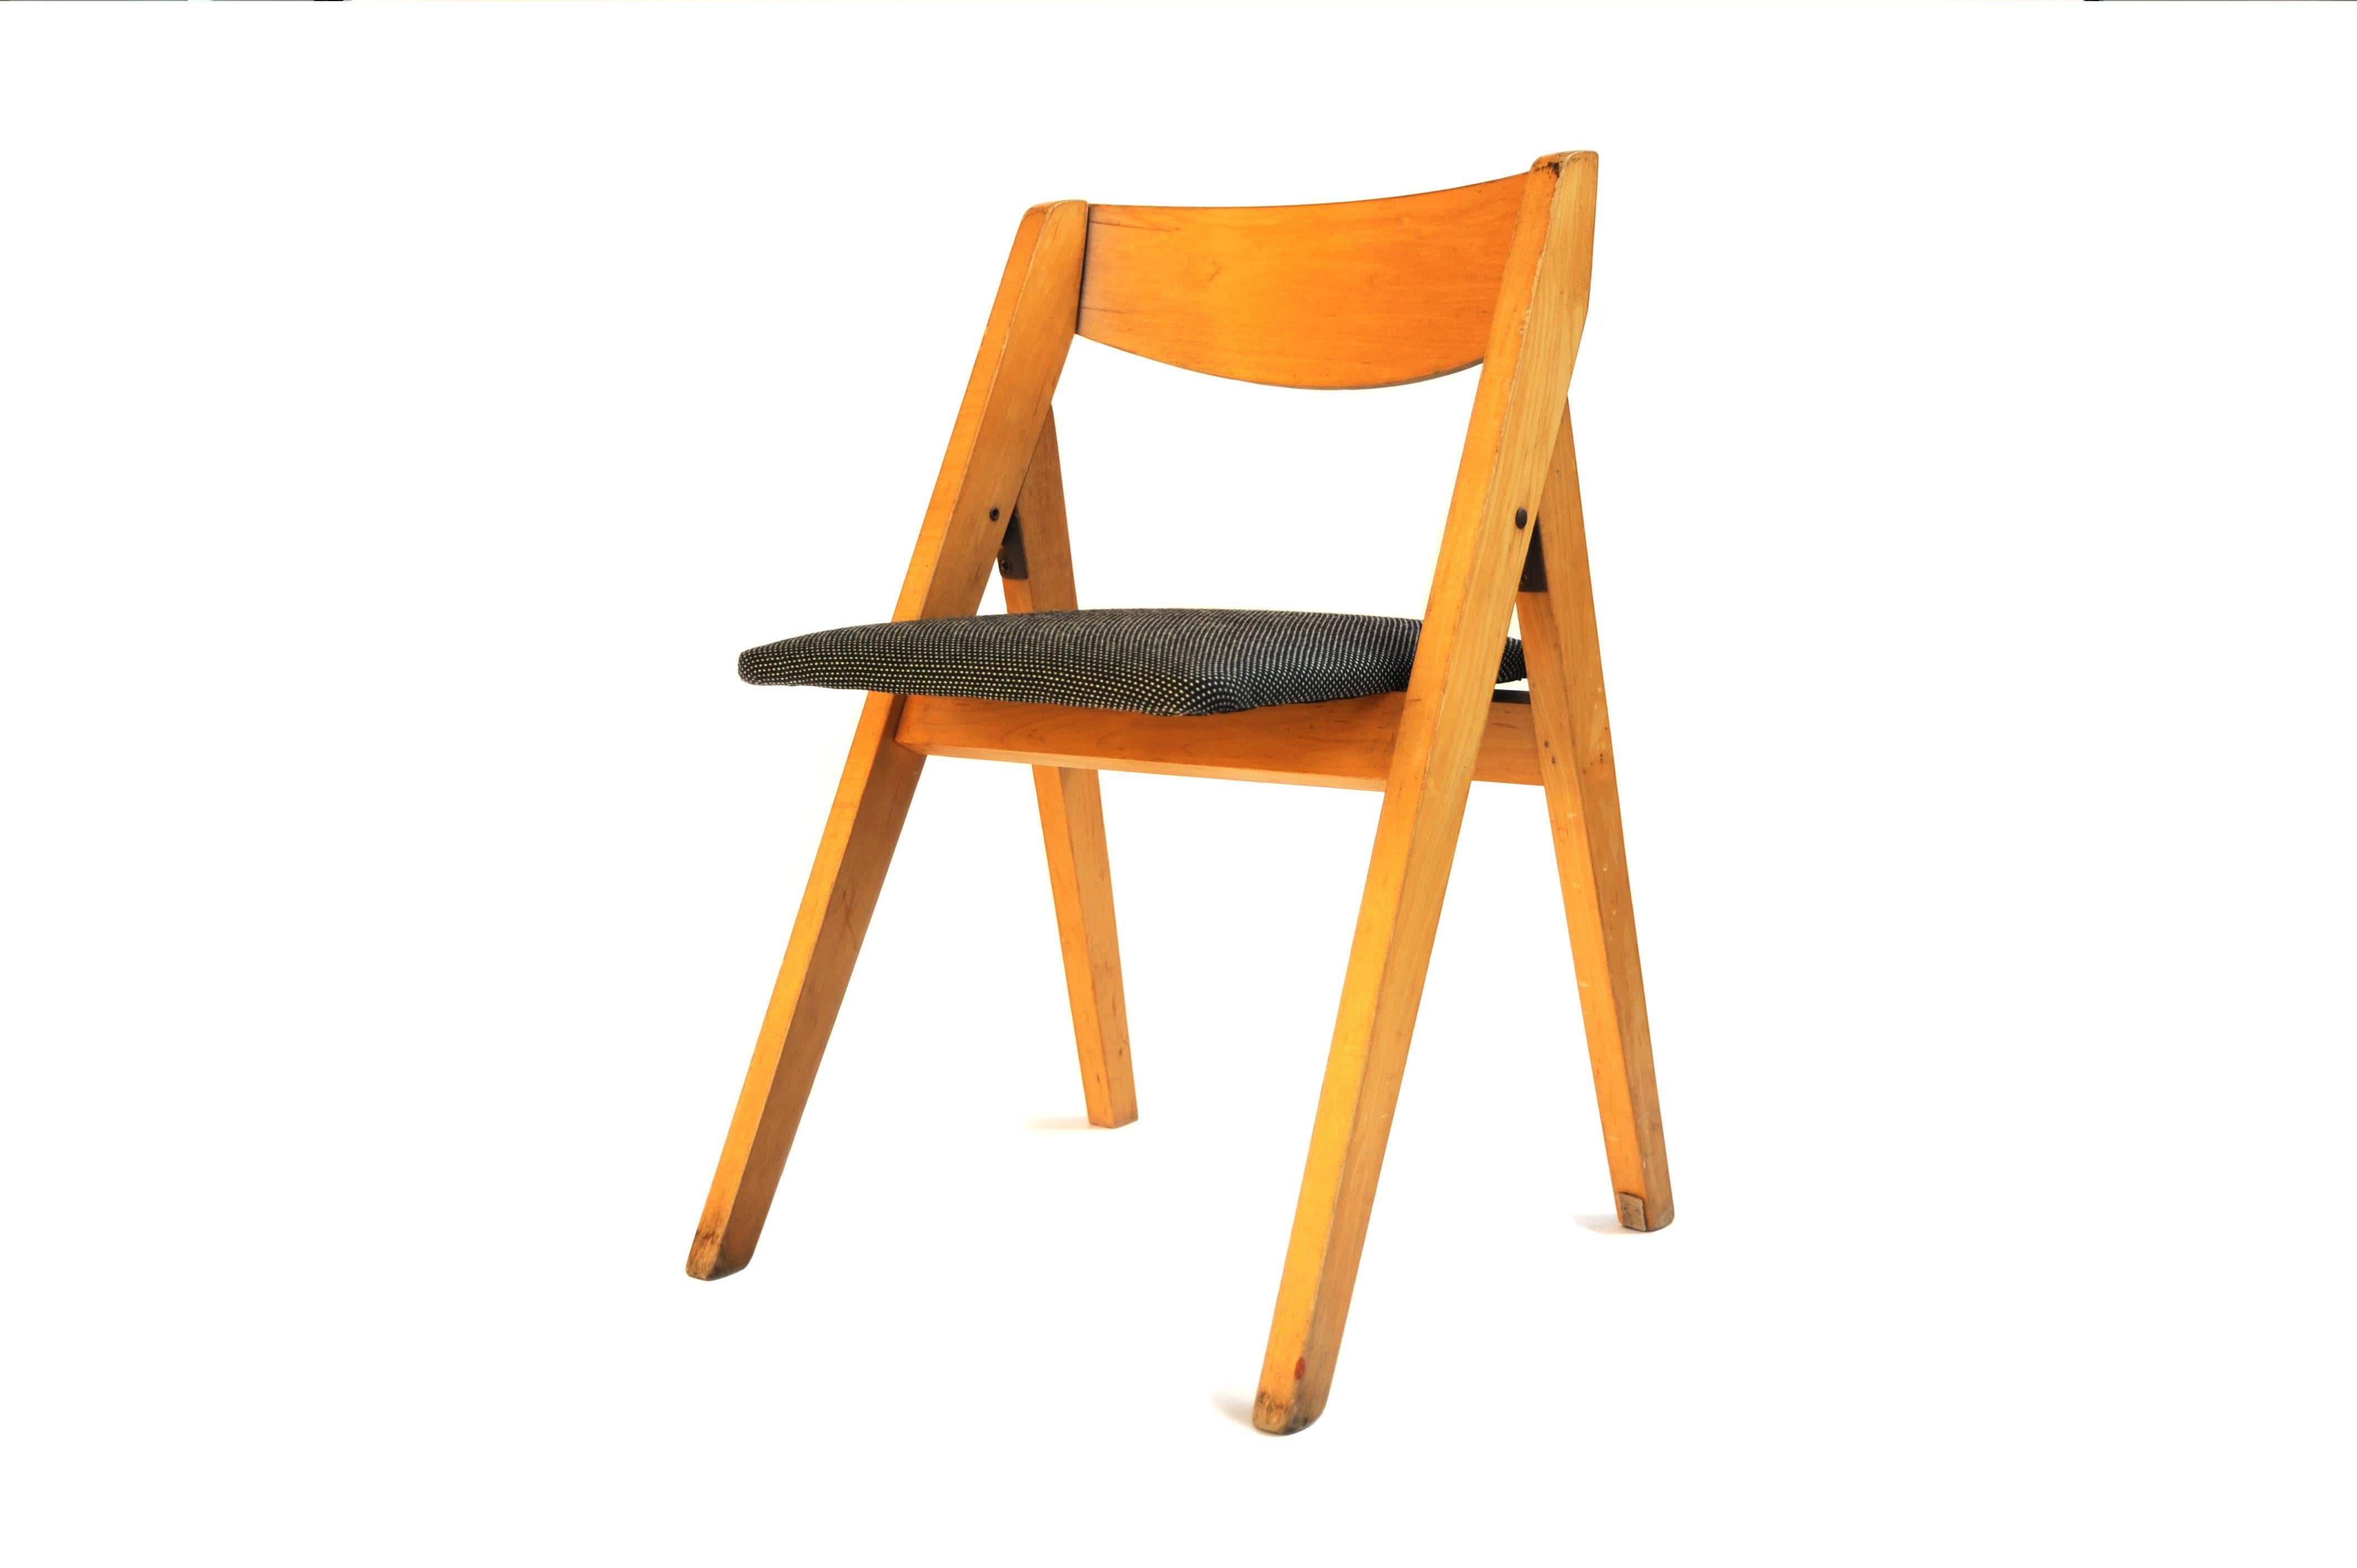 Folding Child Chair in Wood with Seat in New White or Black Maharam Fabric

1960s
Wood, upholstered seat
Recovered in contemporary Maharam fabric
H 22.5 in, W 14.5 in, D 14 in.
Priced individually
Six chairs available: 5 white, 1 black